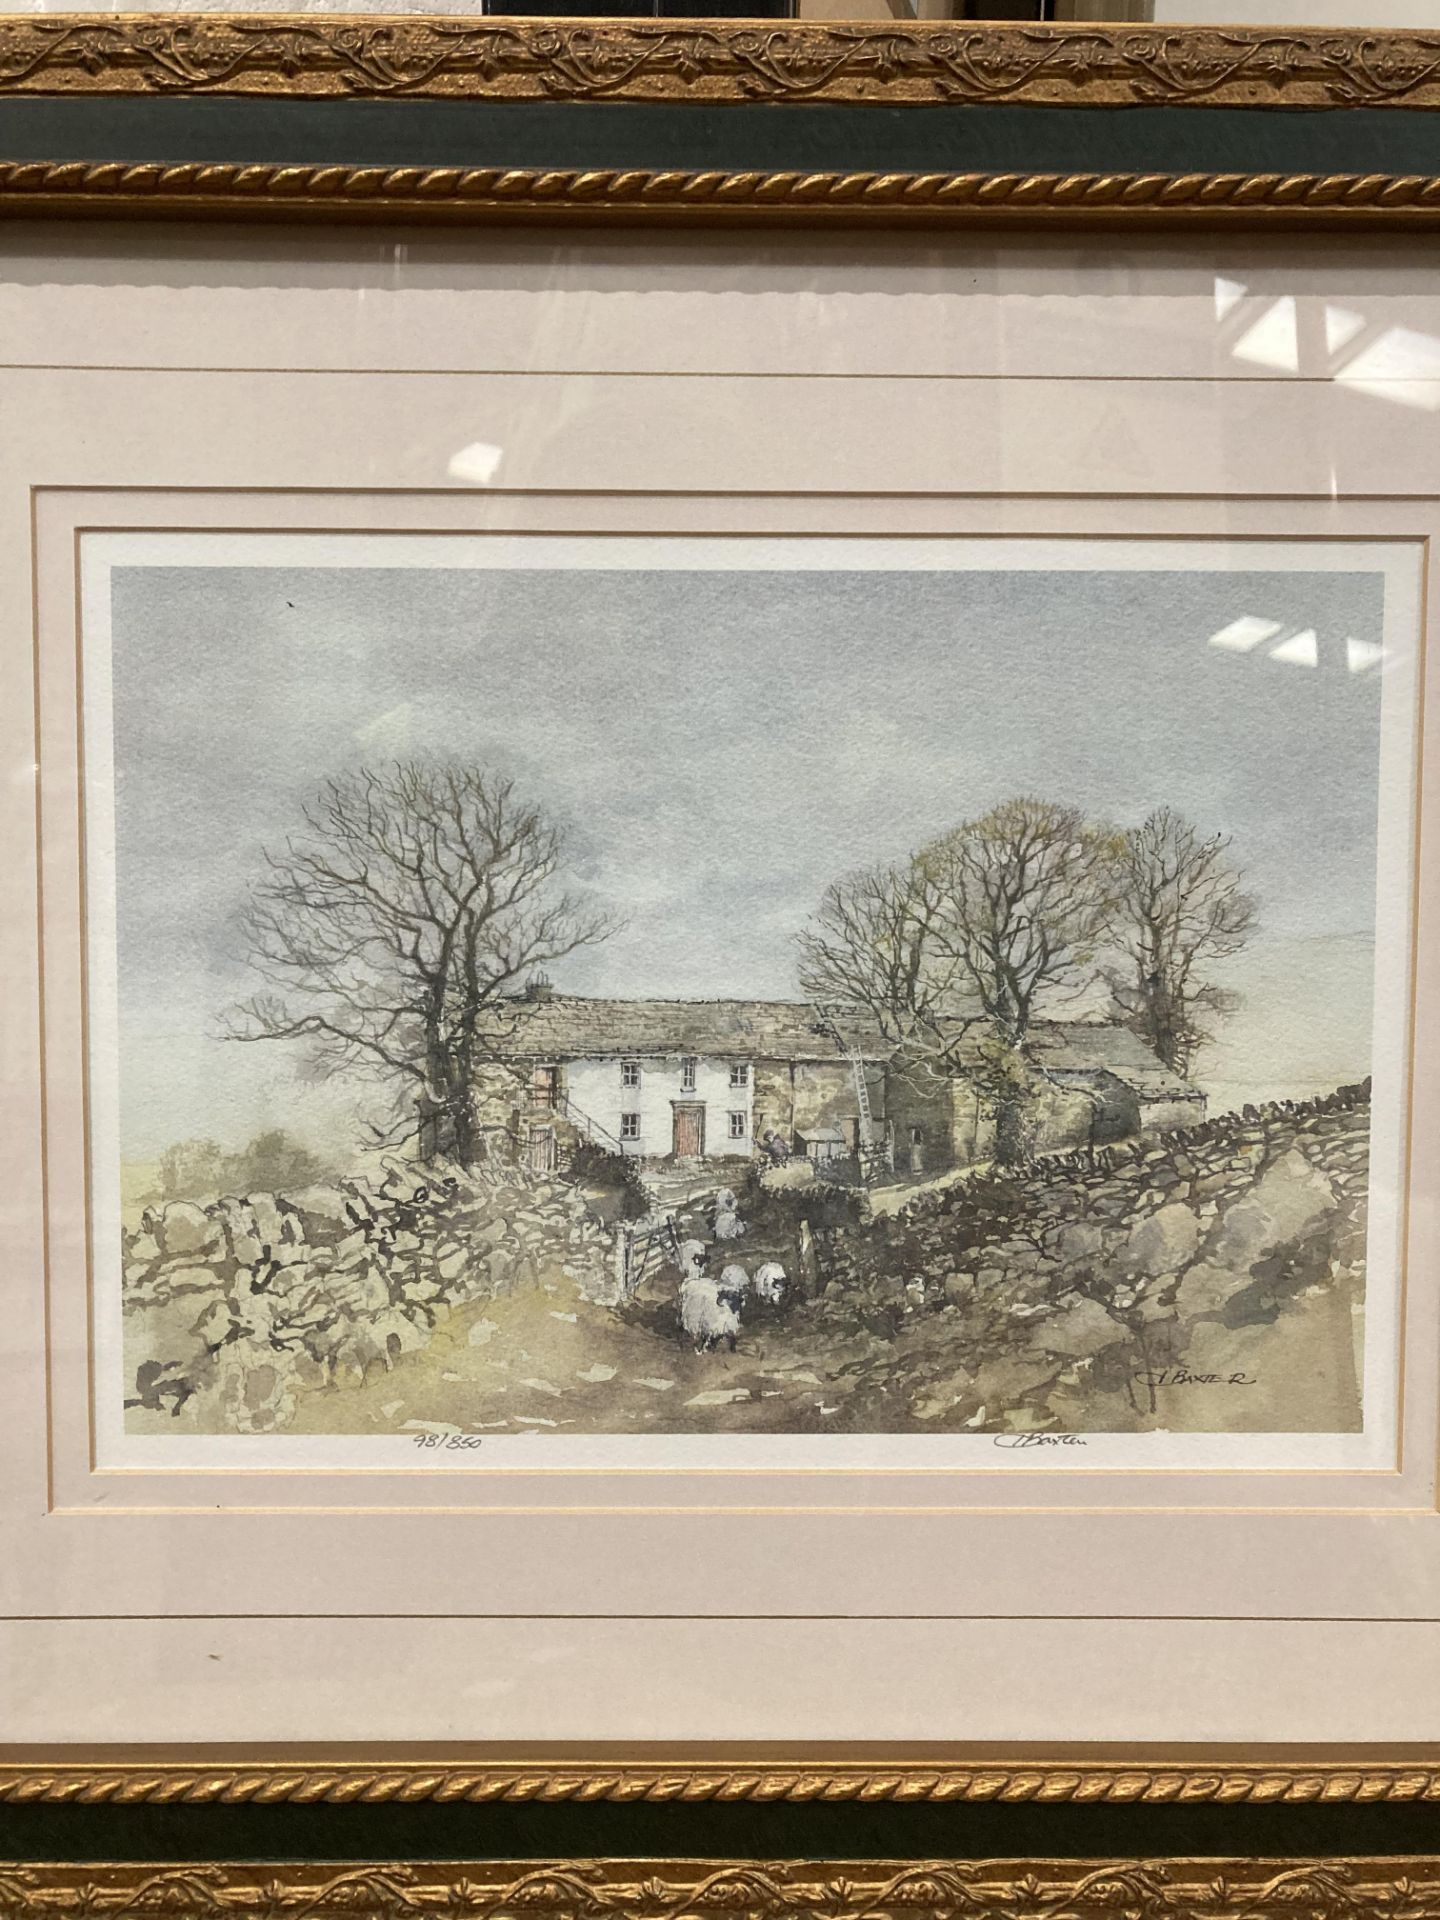 J Baxter framed Limited Edition print 'Brough, N Yorks' 30cm x 36cm signed in pencil and no 98/850. - Image 2 of 4